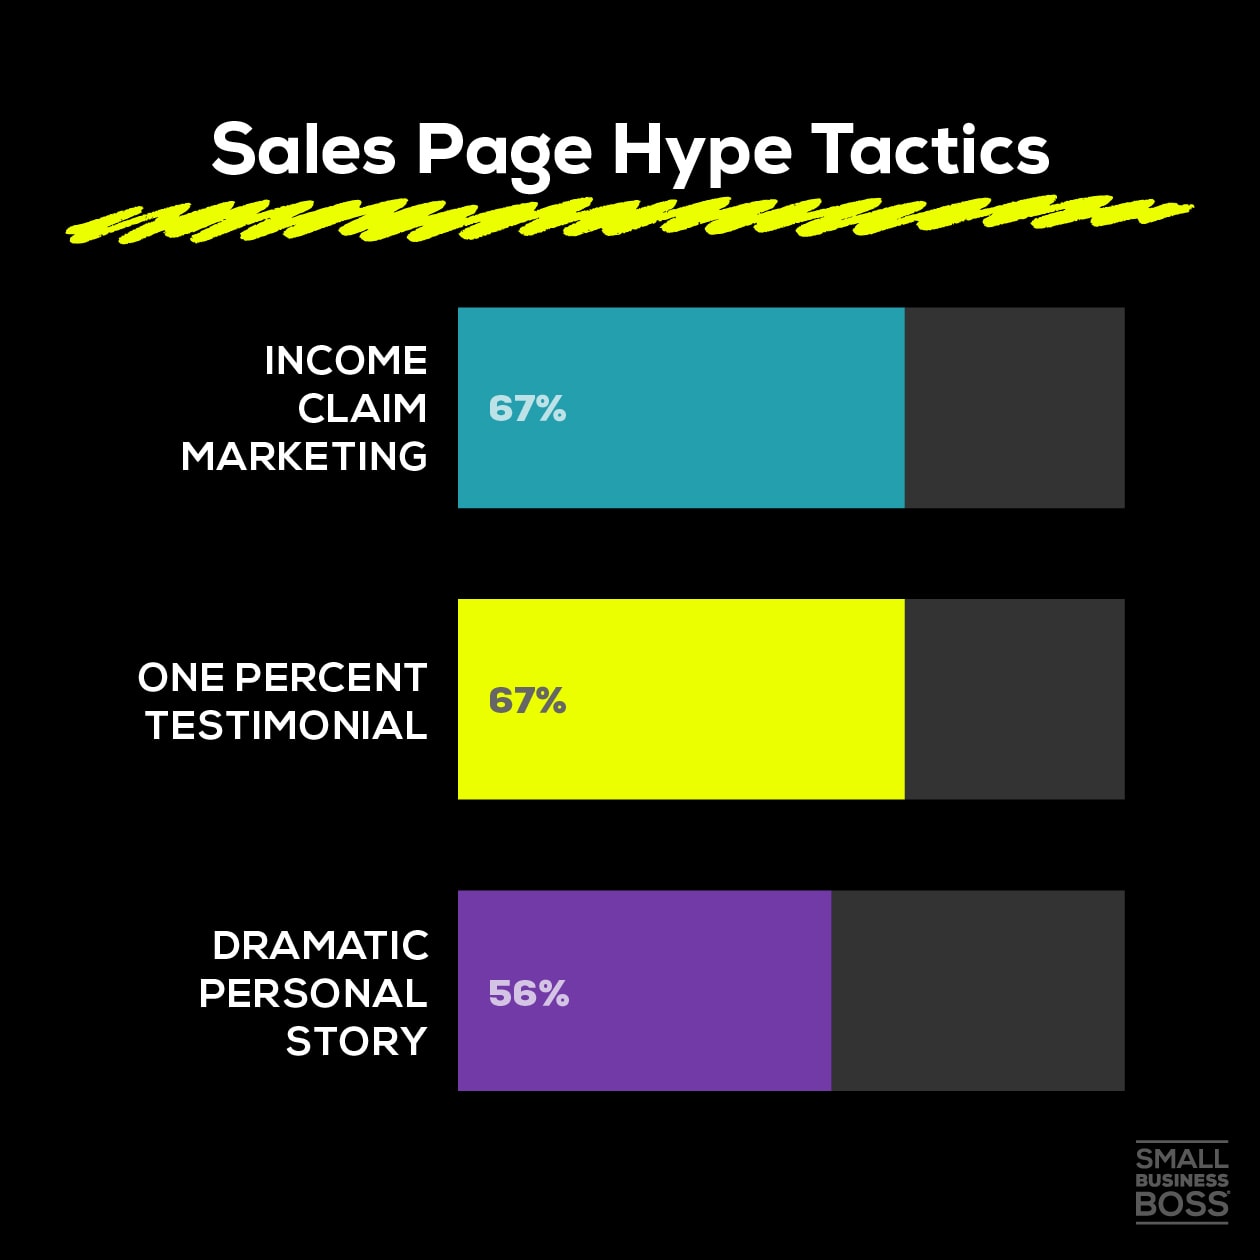 Sales Page Hype Tactics